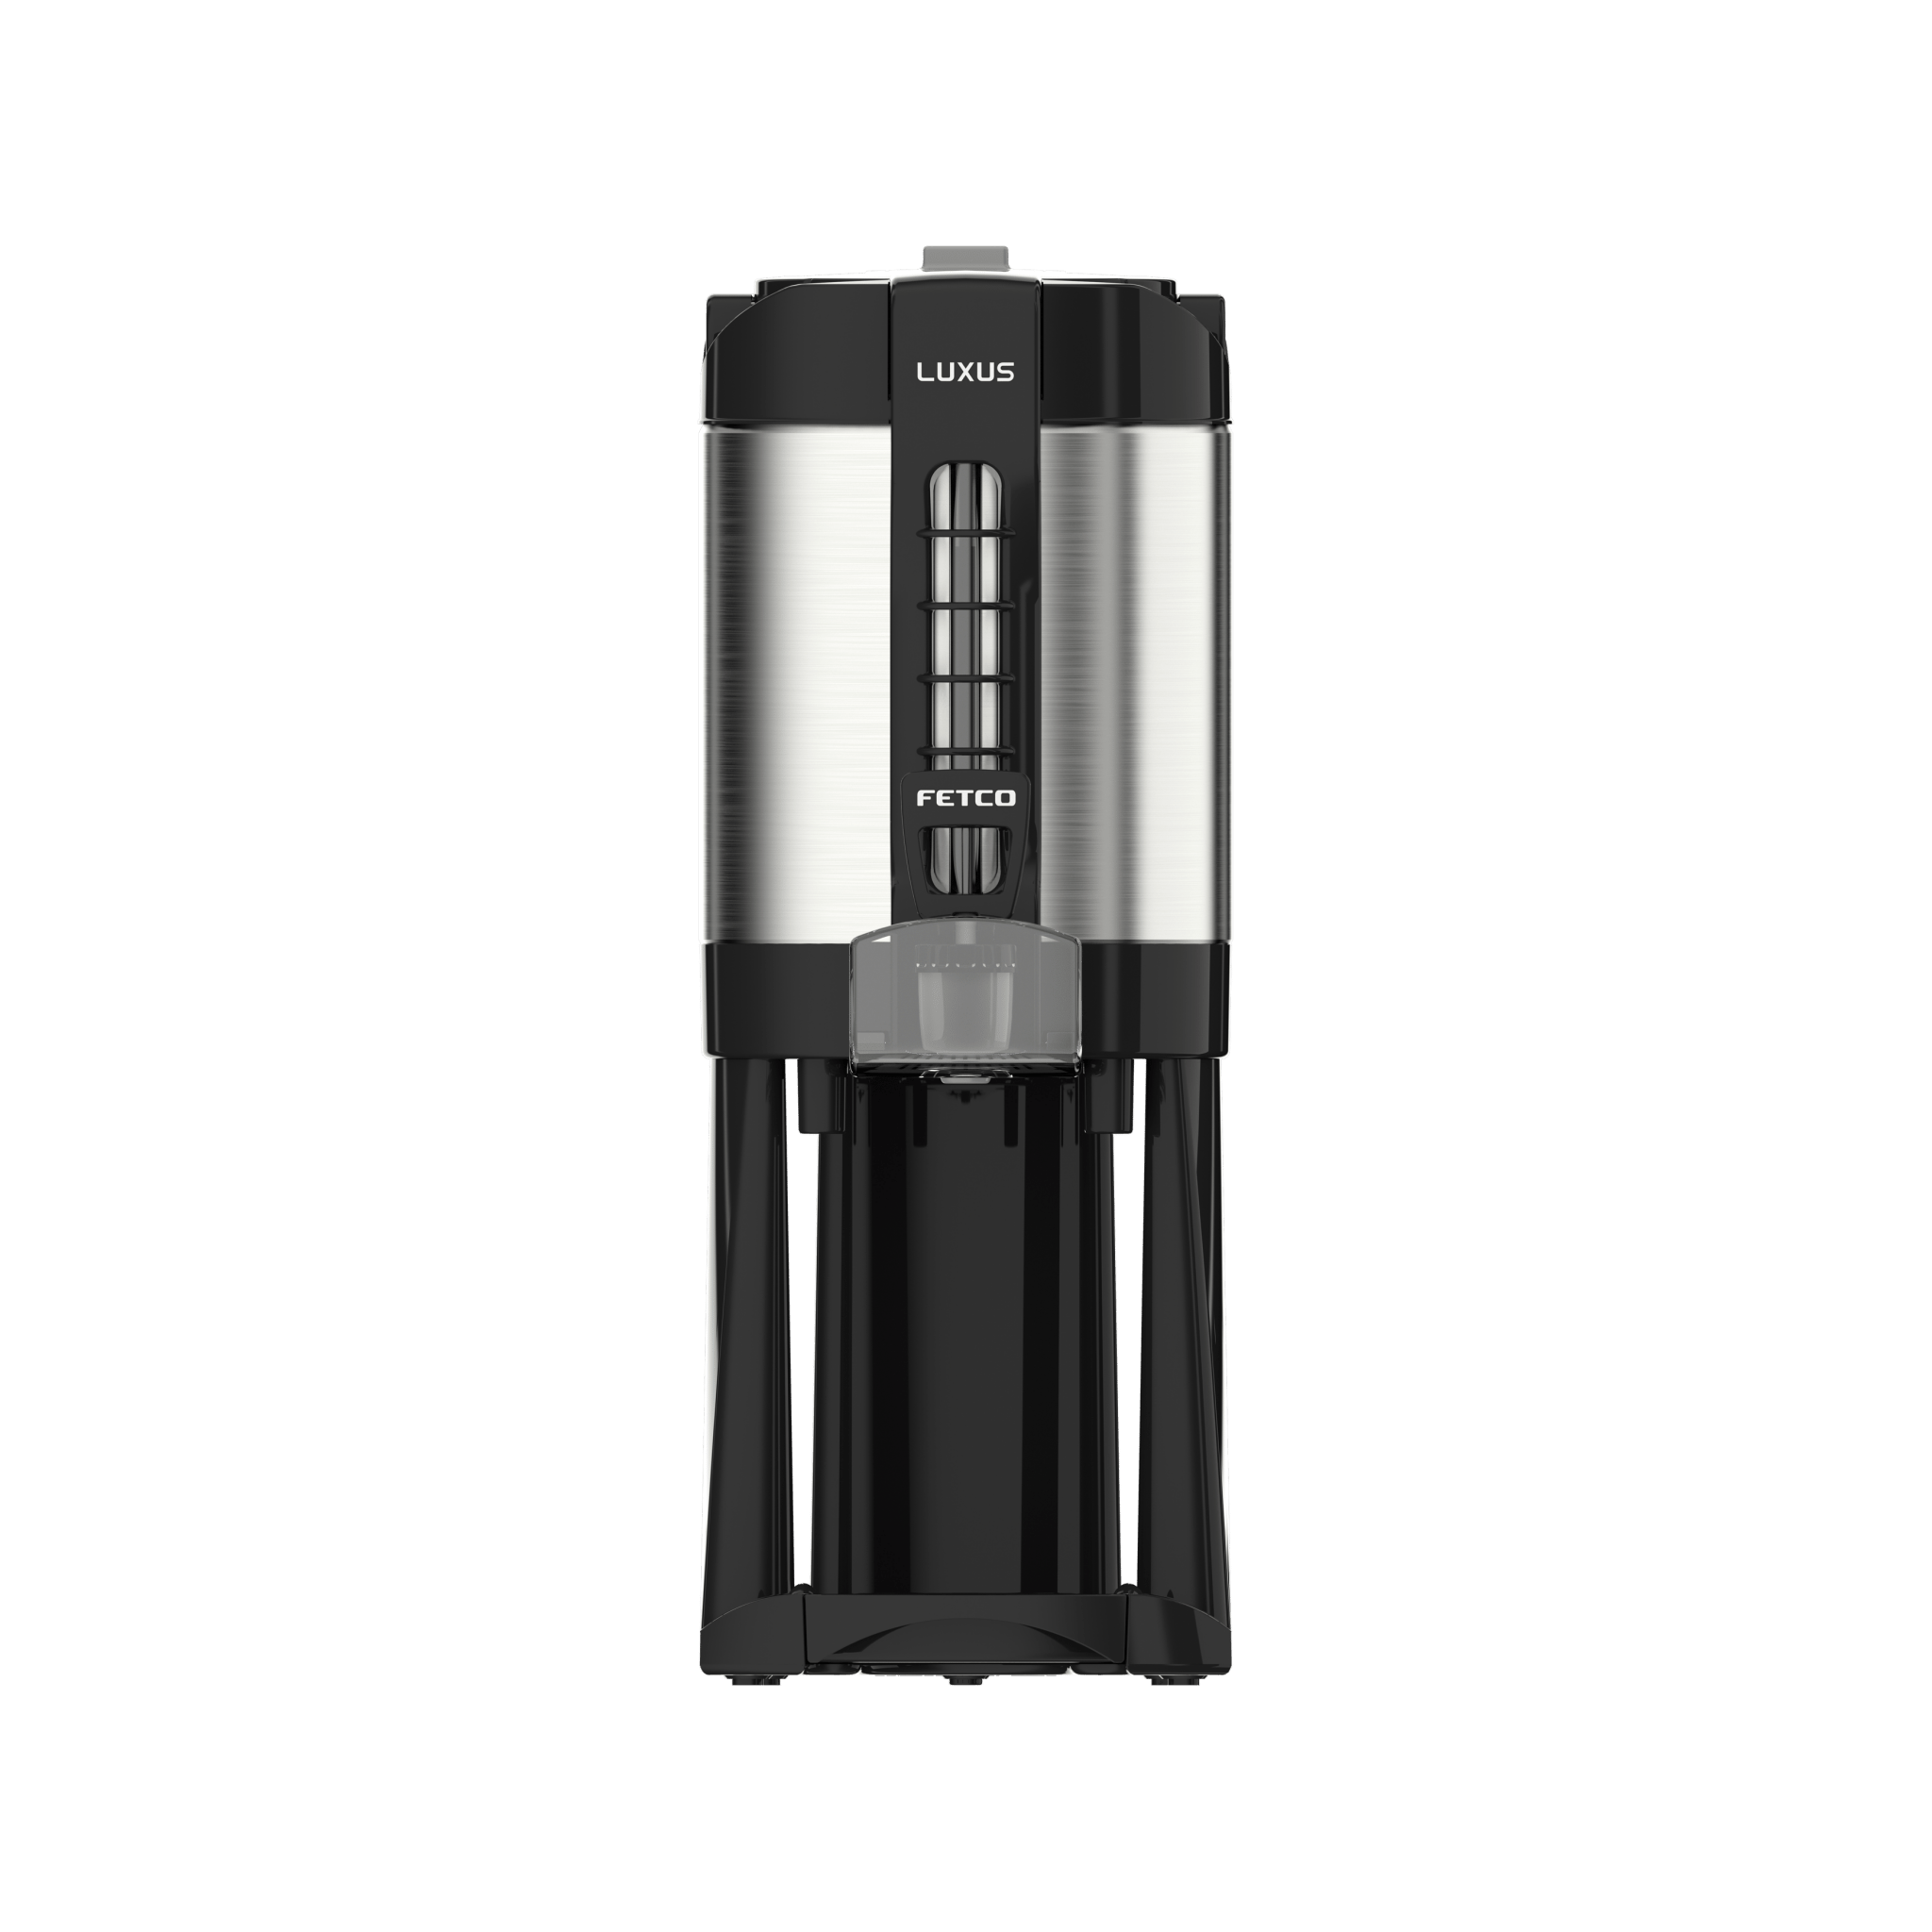 https://cdn.shopify.com/s/files/1/1566/4409/products/fetco-fetco-luxus-lgd-thermal-coffee-dispenser-server-stand-1-1-5-2-gal-beverage-dispensers-1-0-gallon-lgd-10-28222708318272-282750.png?v=1699022011